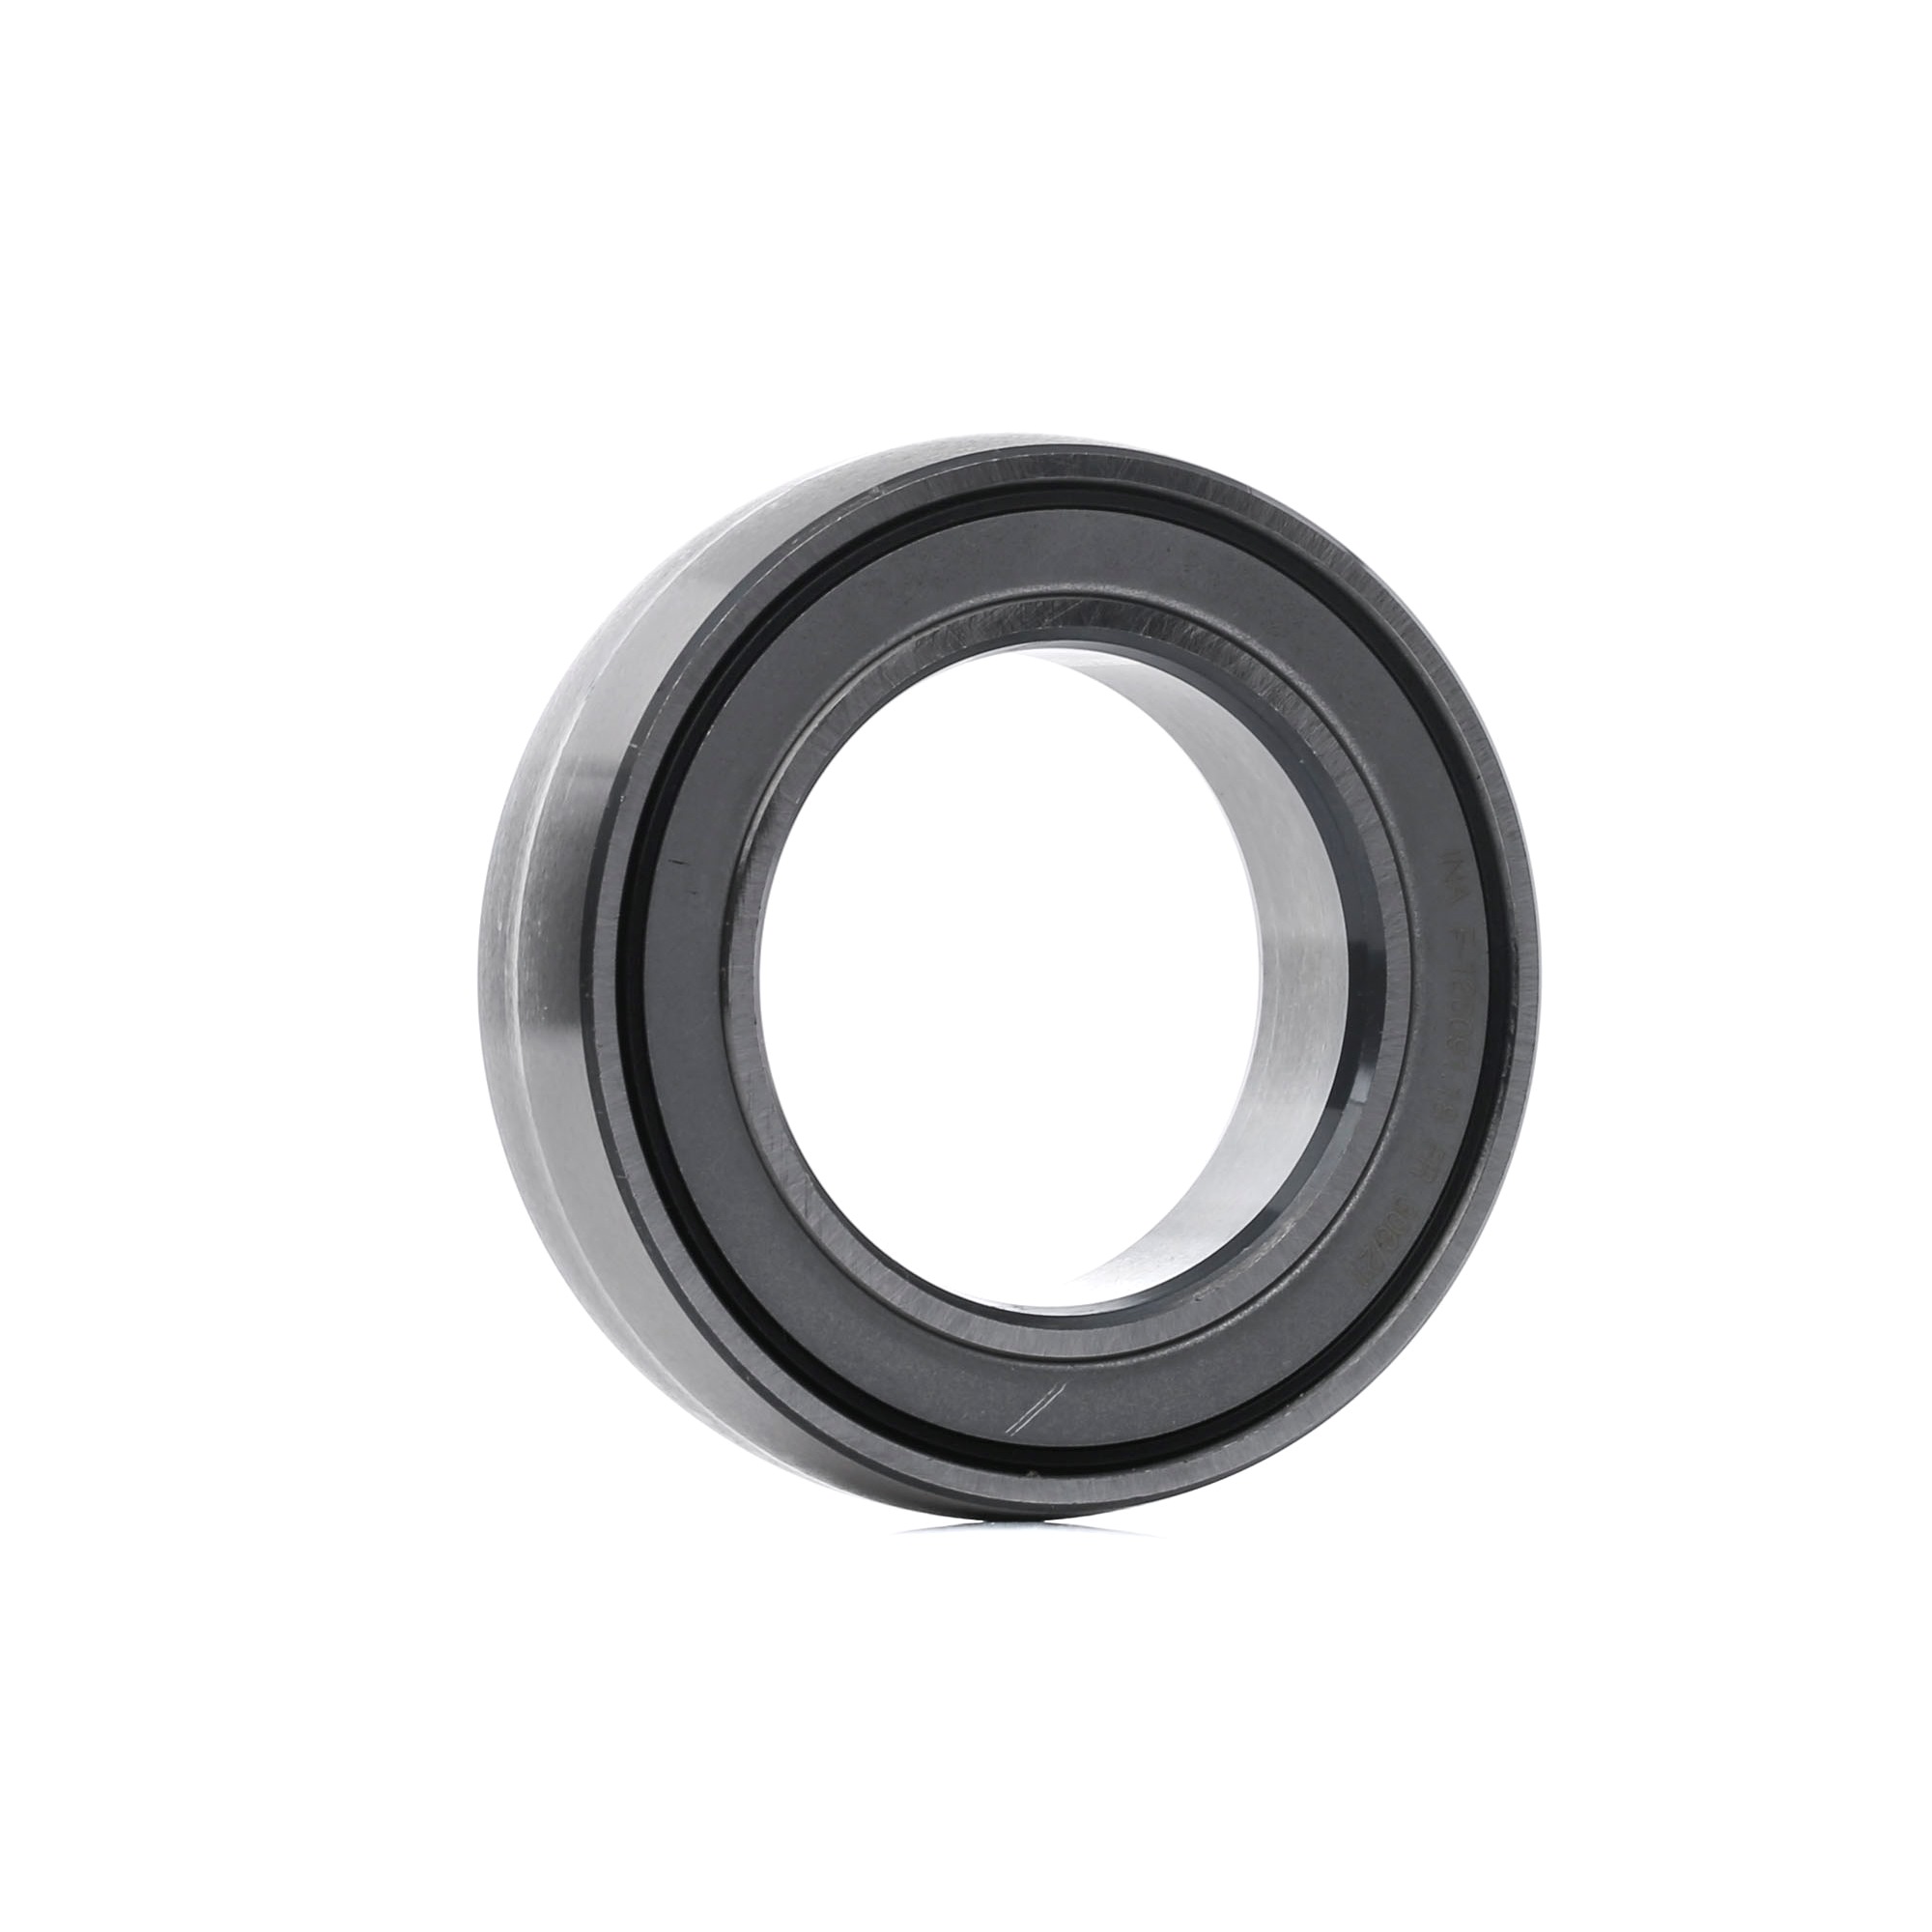 Original 776 0002 10 FAG Propshaft bearing experience and price